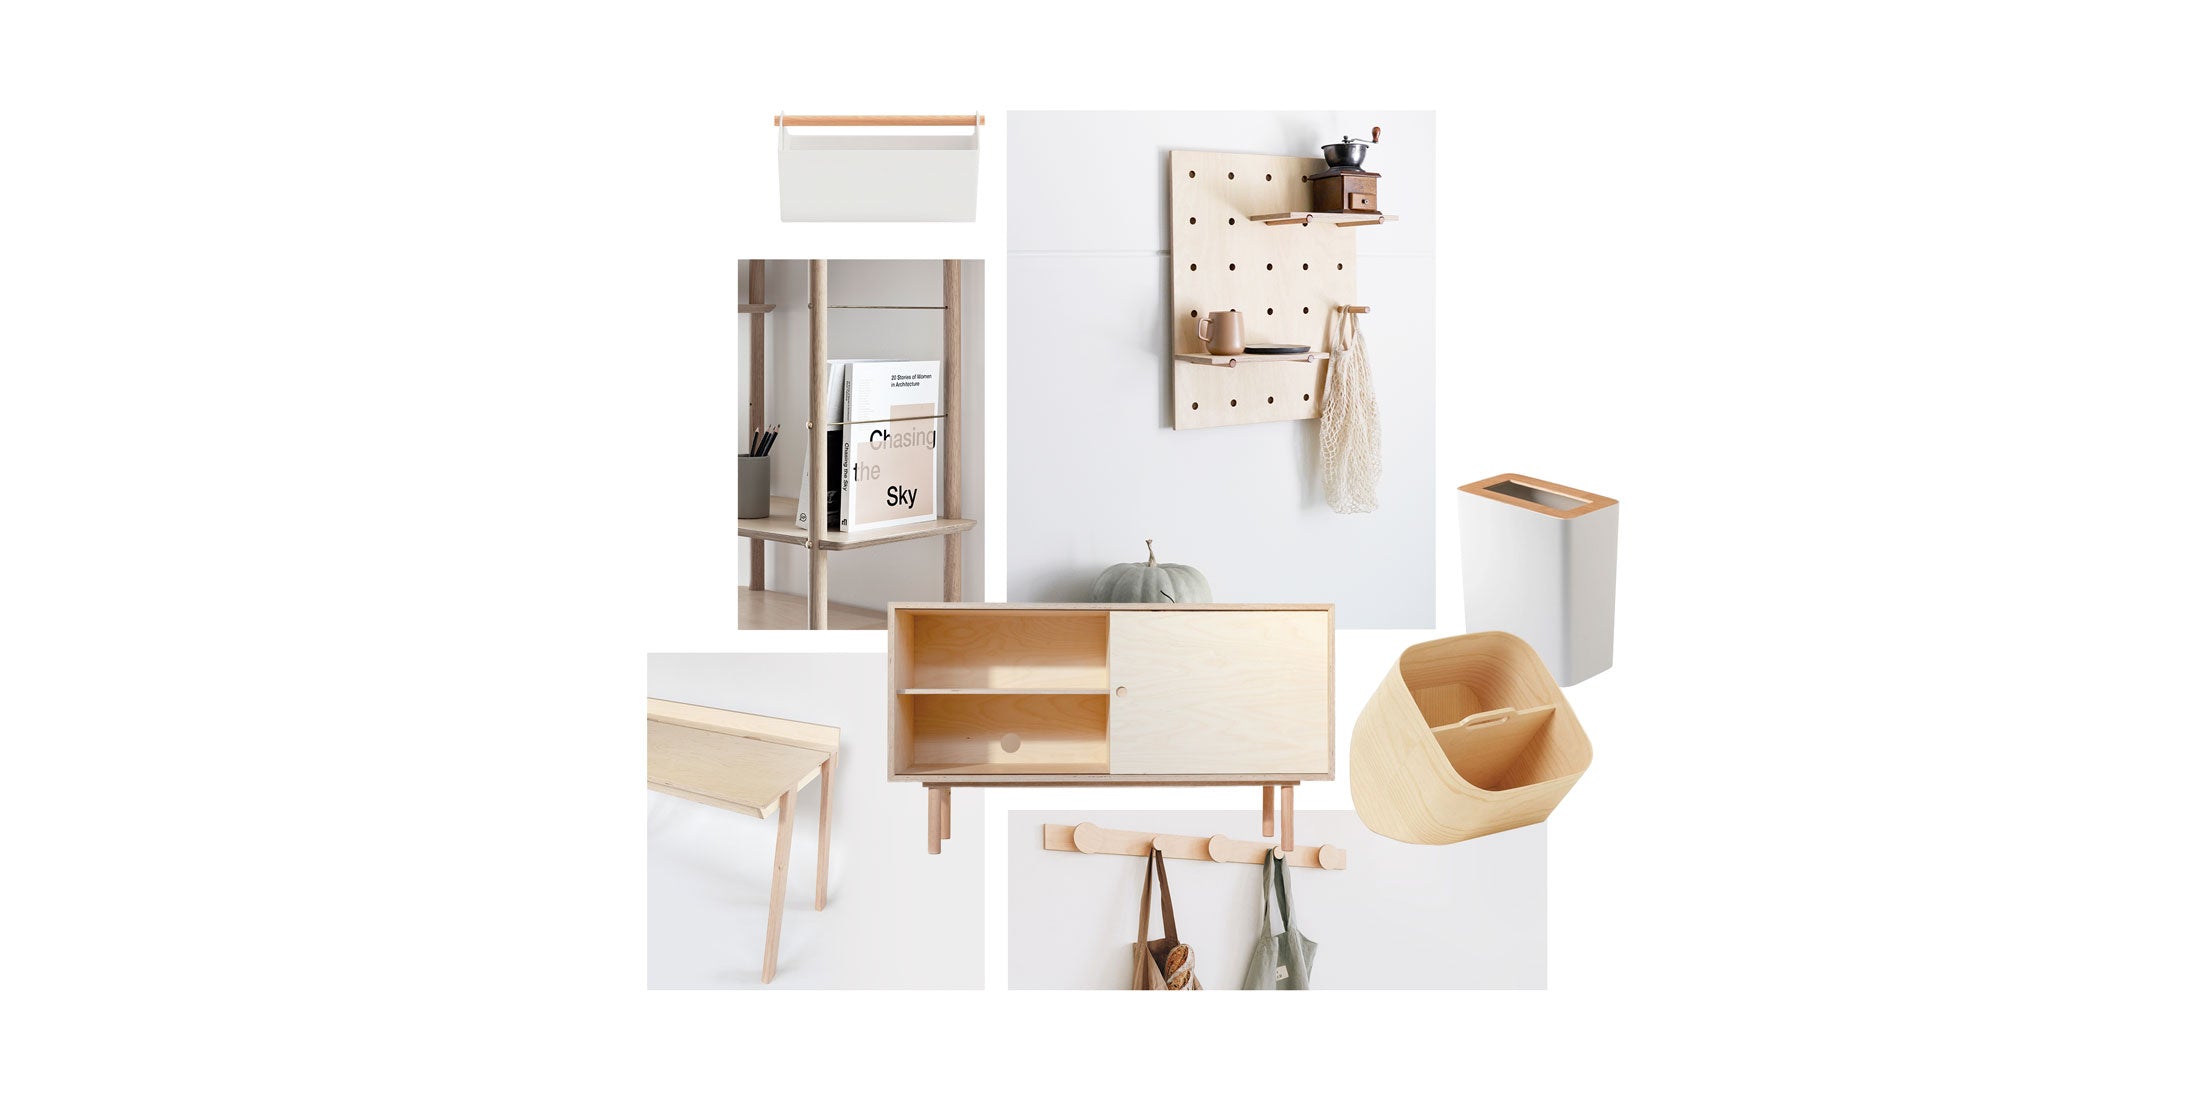 Plyroom Furniture for the Home Office Featured in The Design Chaser